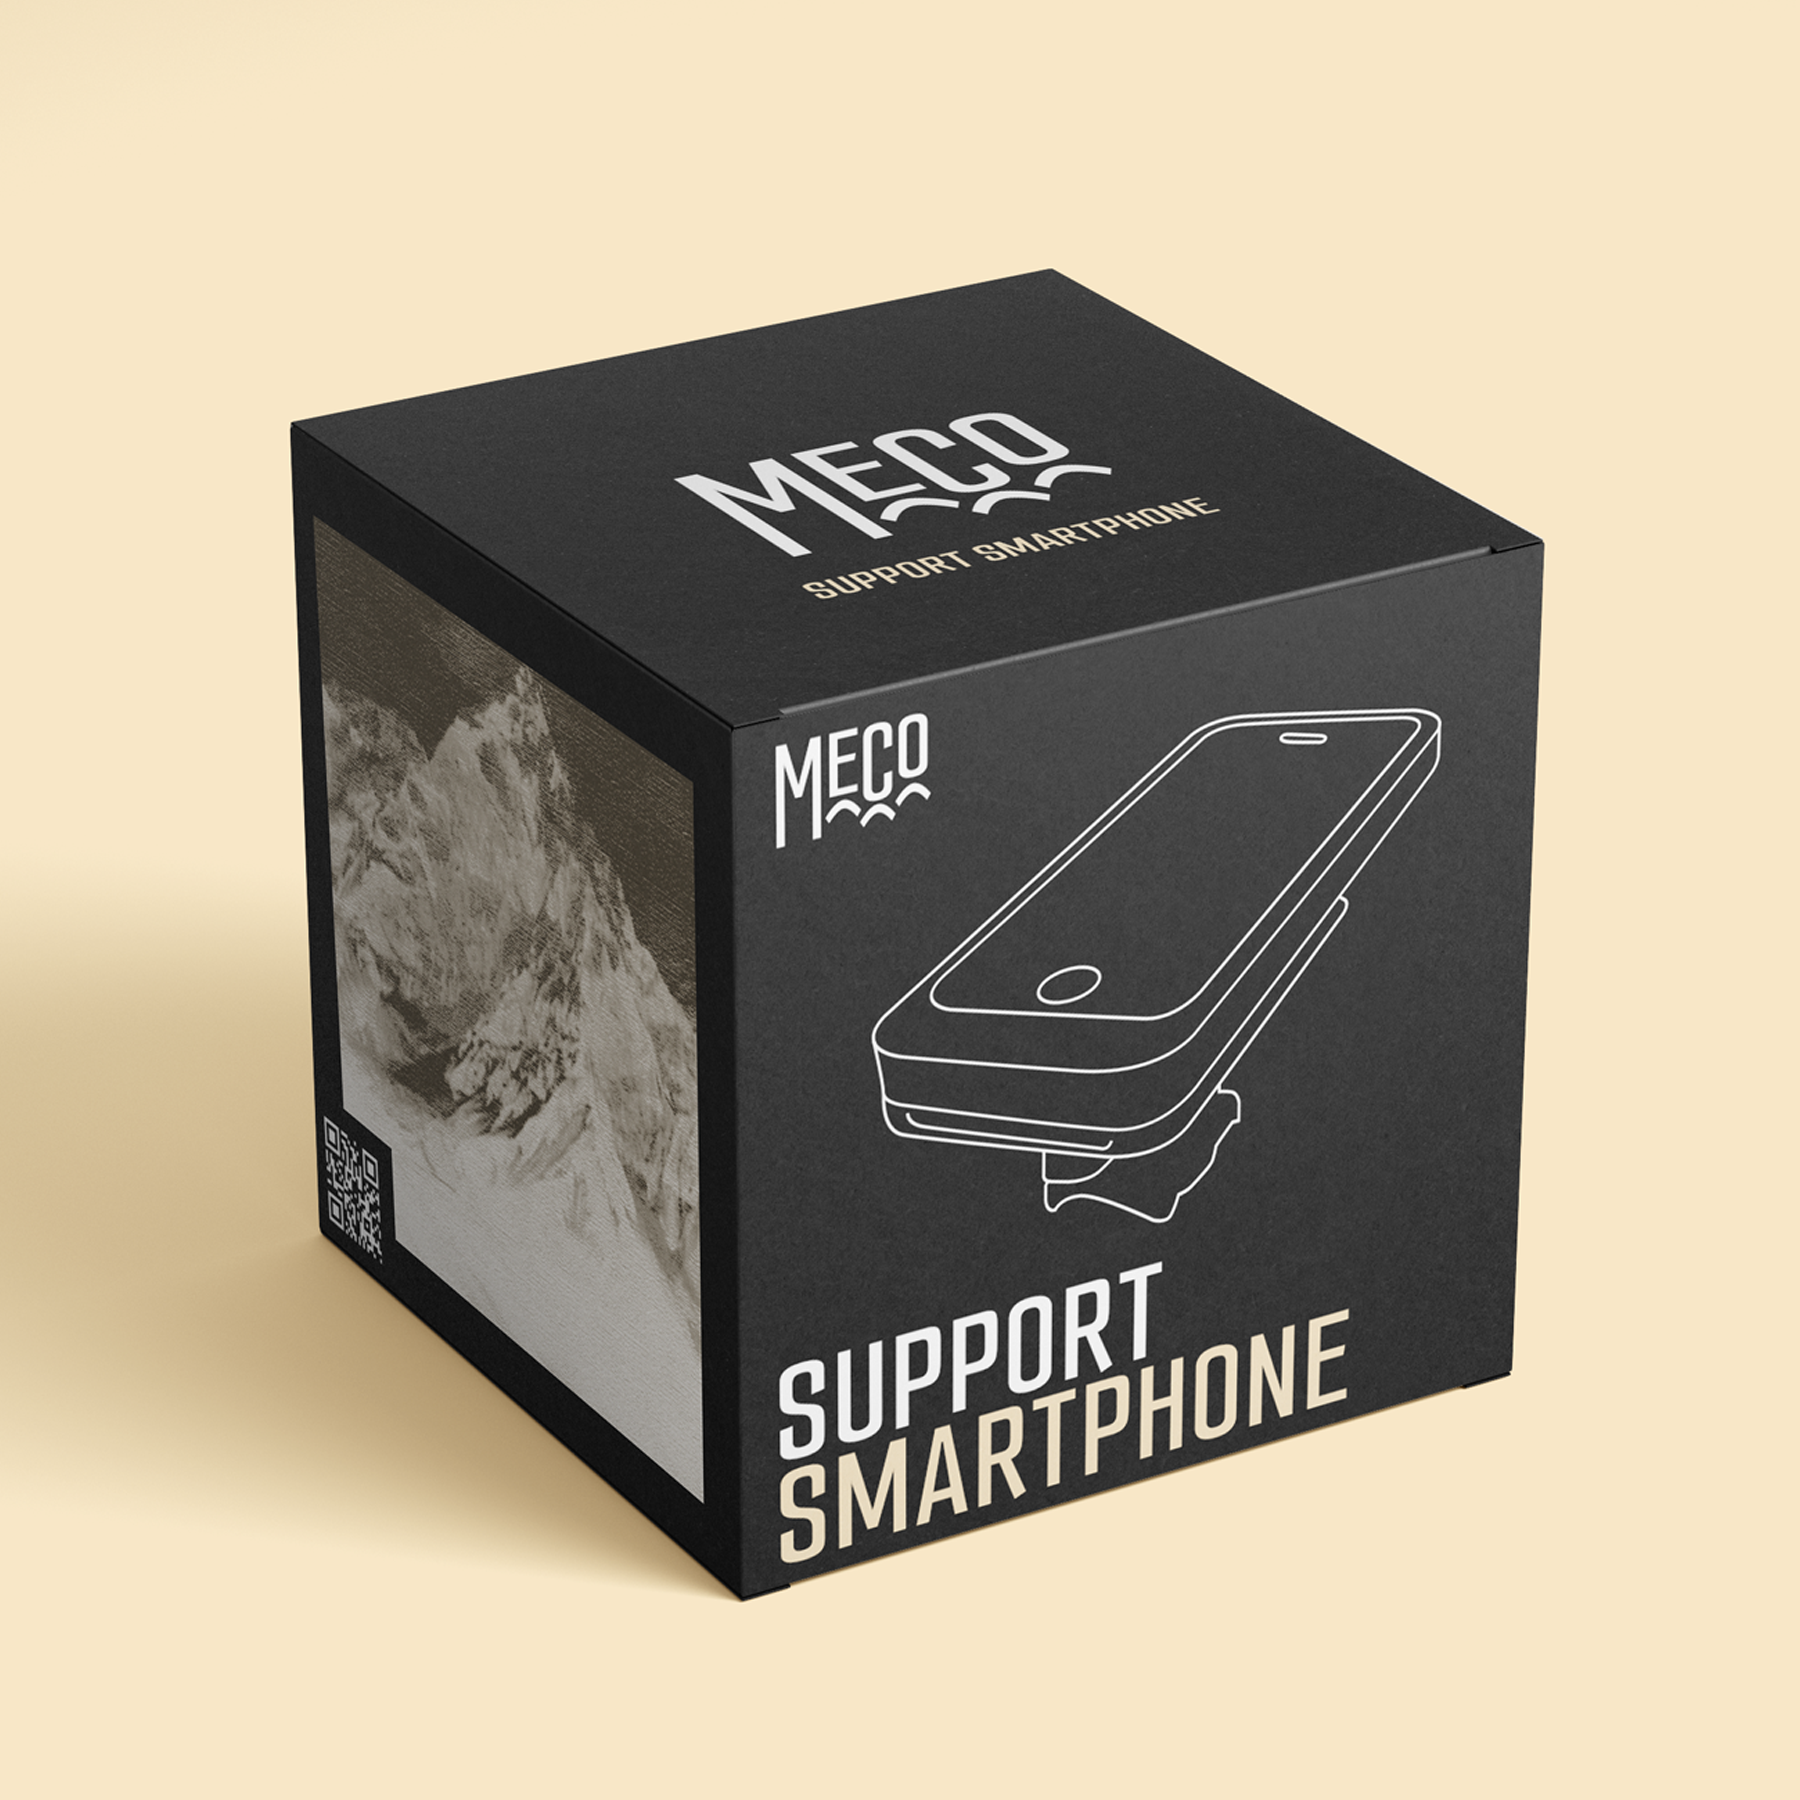 Packaging du support pour smartphone MECO